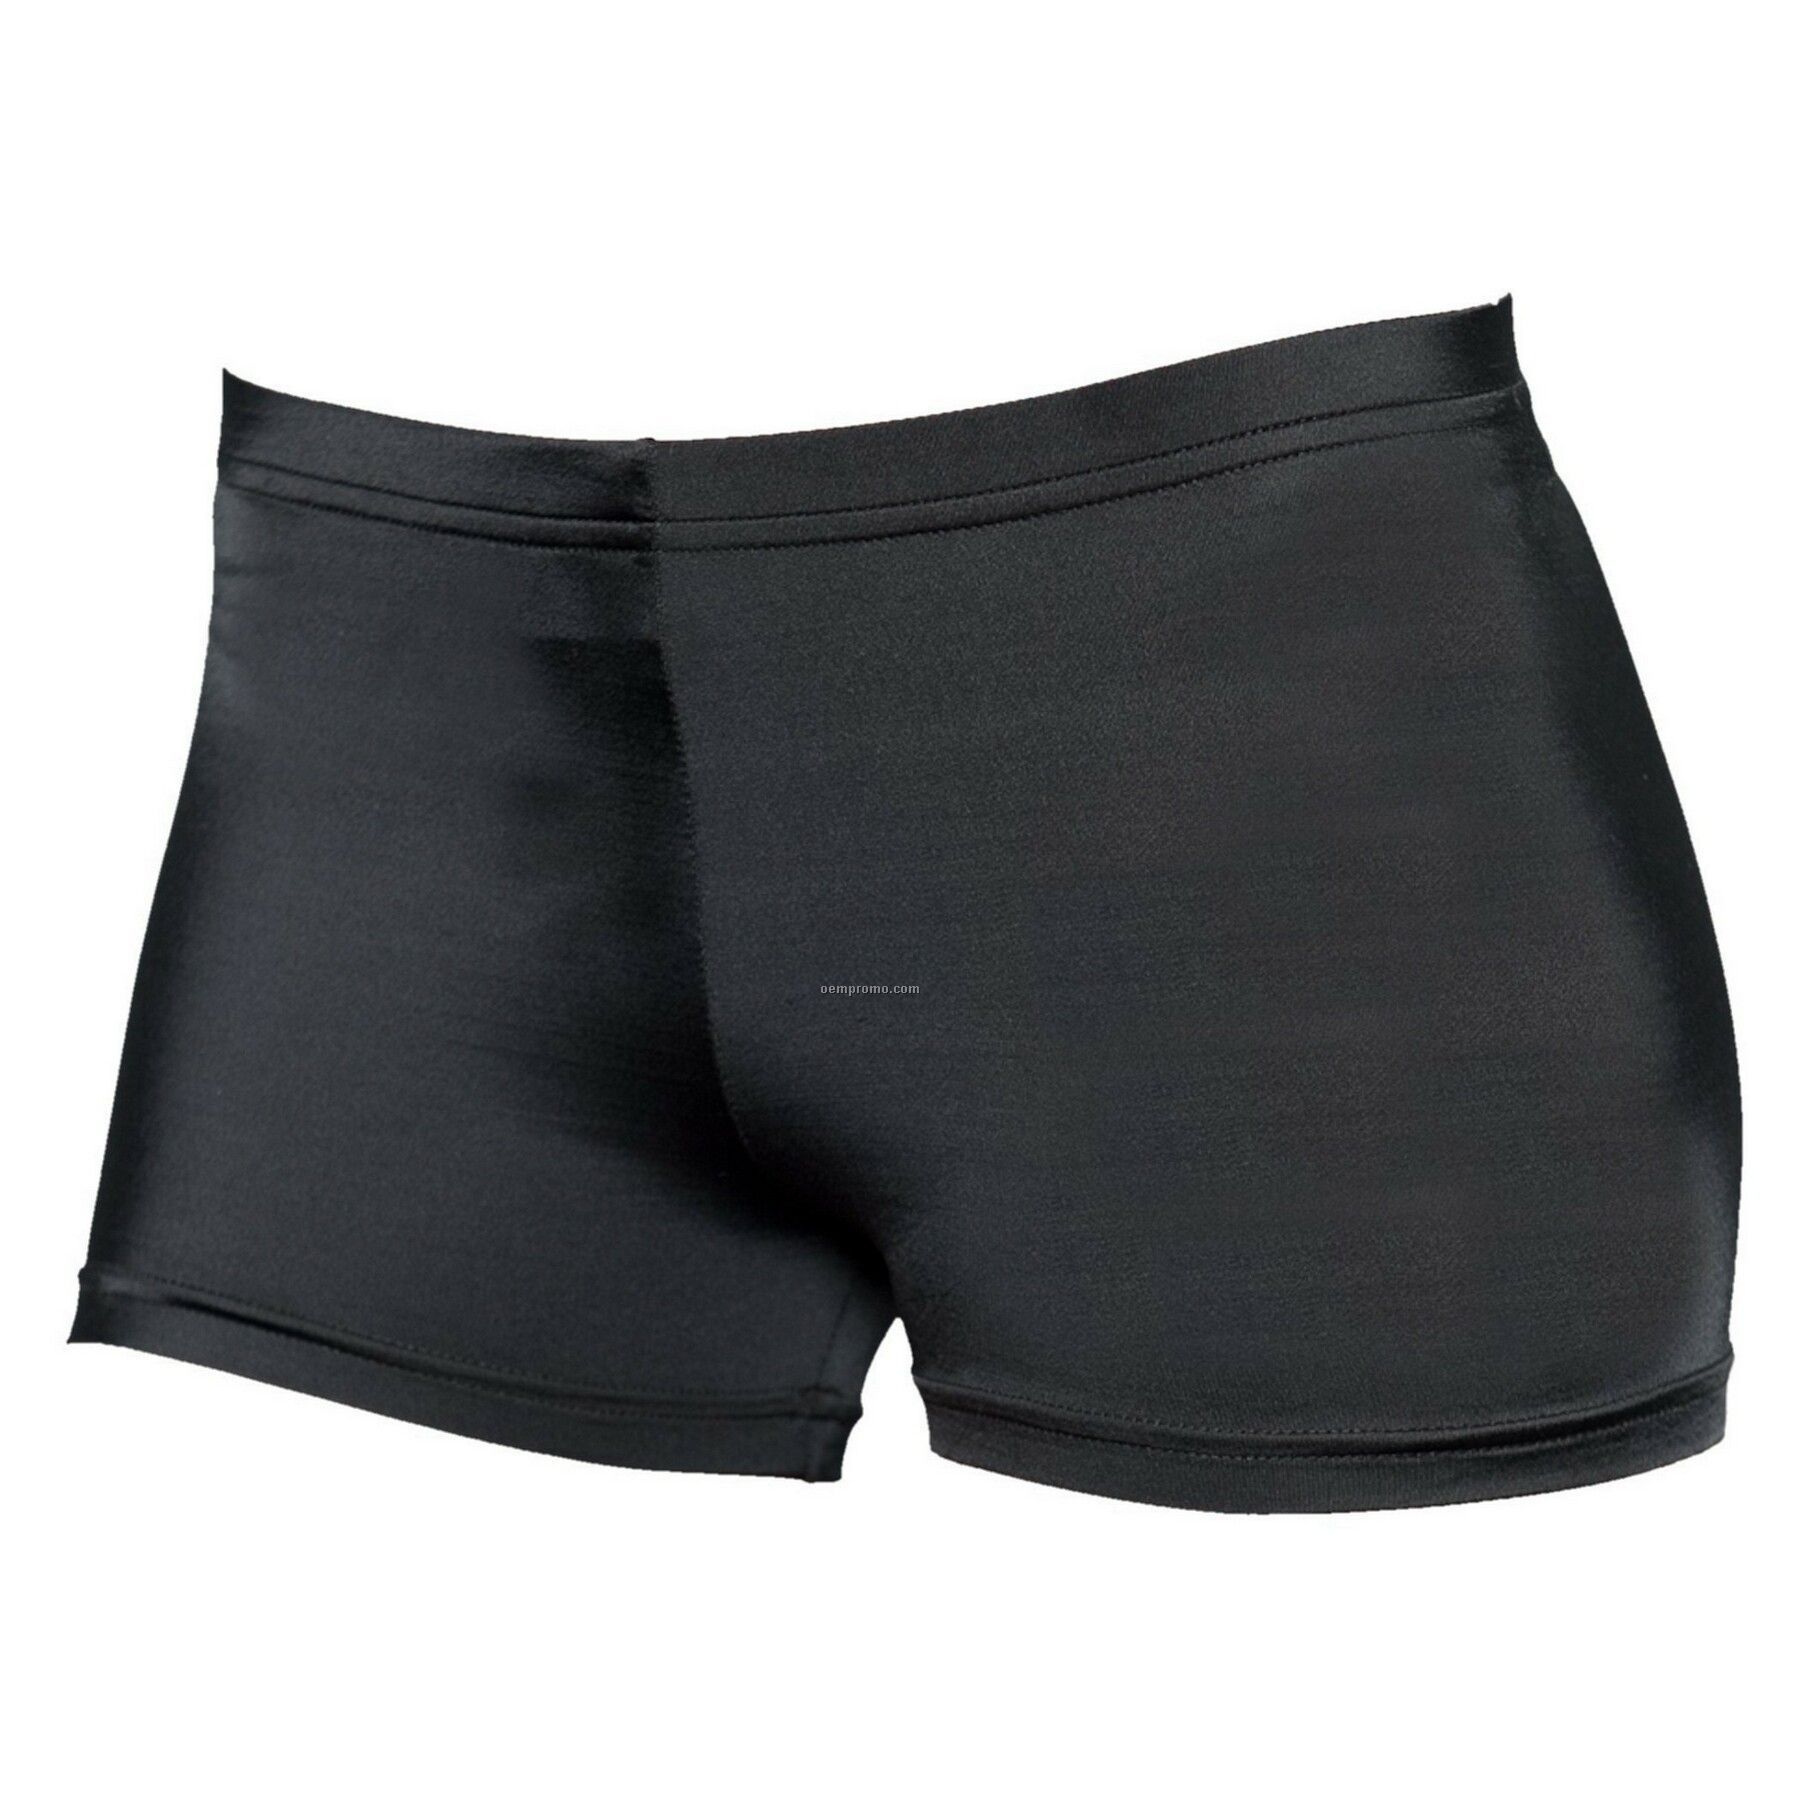 Youth Black Show Stopping Sport Short